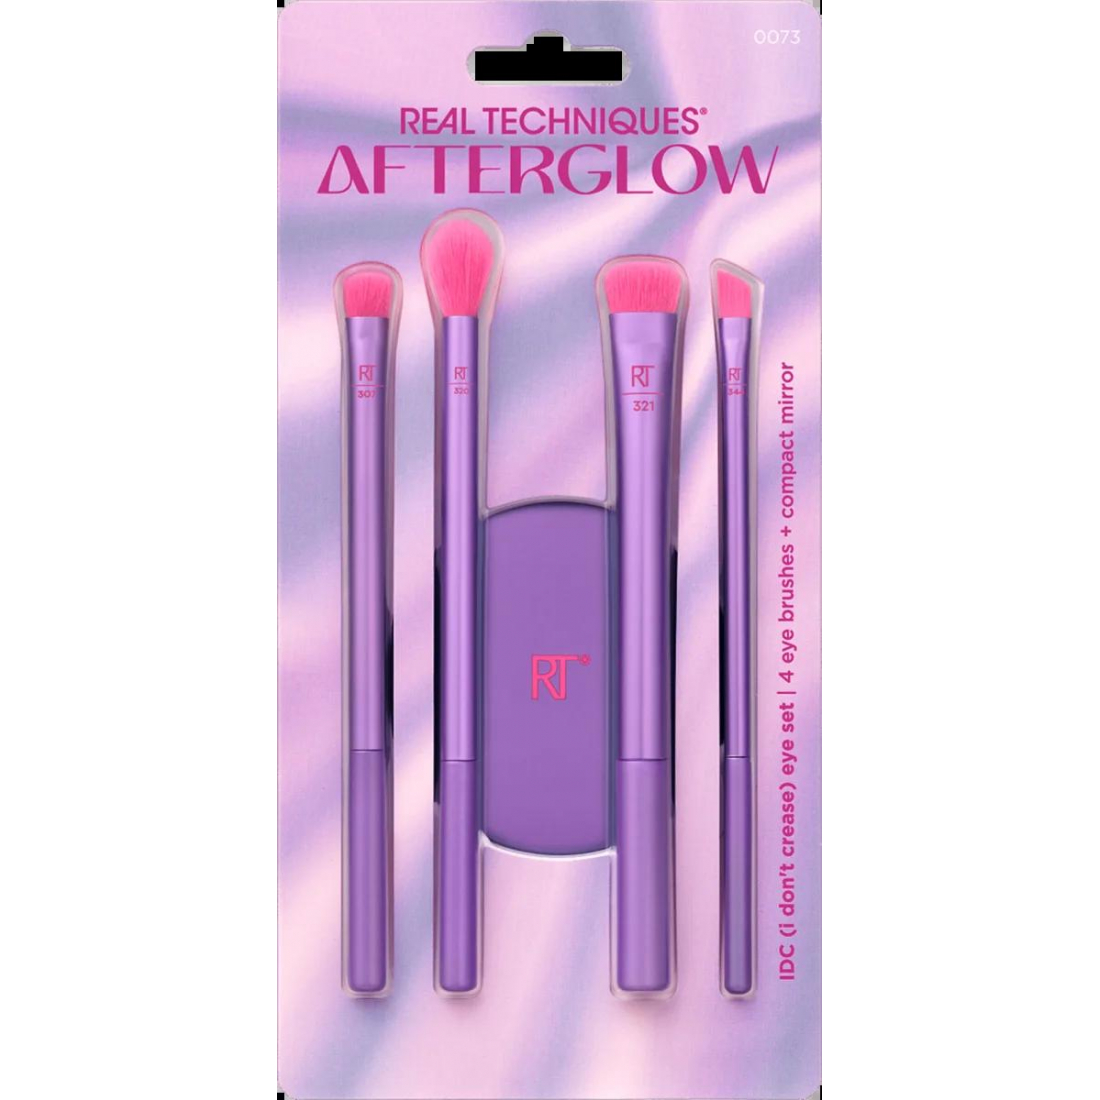 'Afterglow I Don'T Crease' Eye Make-up set - 5 Pieces